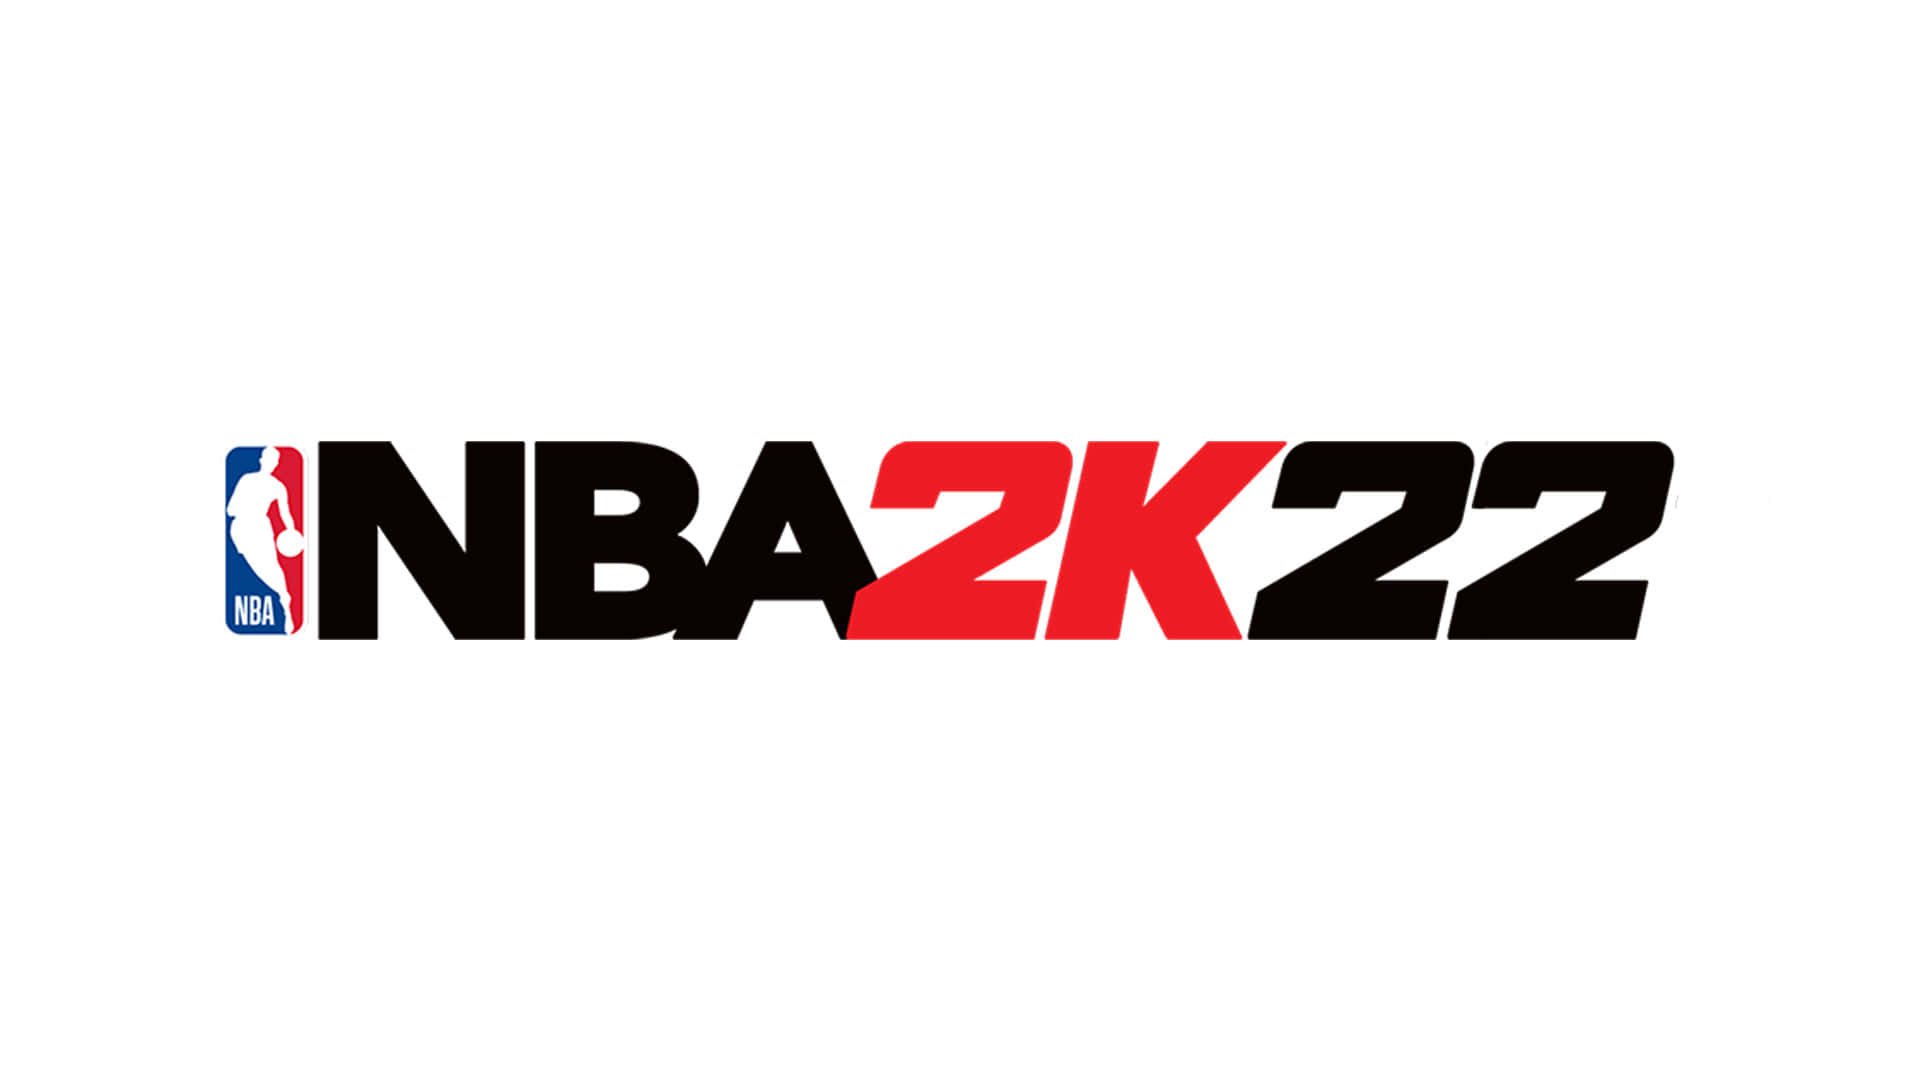 Play NBA 2k22 on Next Gen consoles like the PS5, Xbox Series X, and Stadia for an unparalleled gaming experience Wallpaper